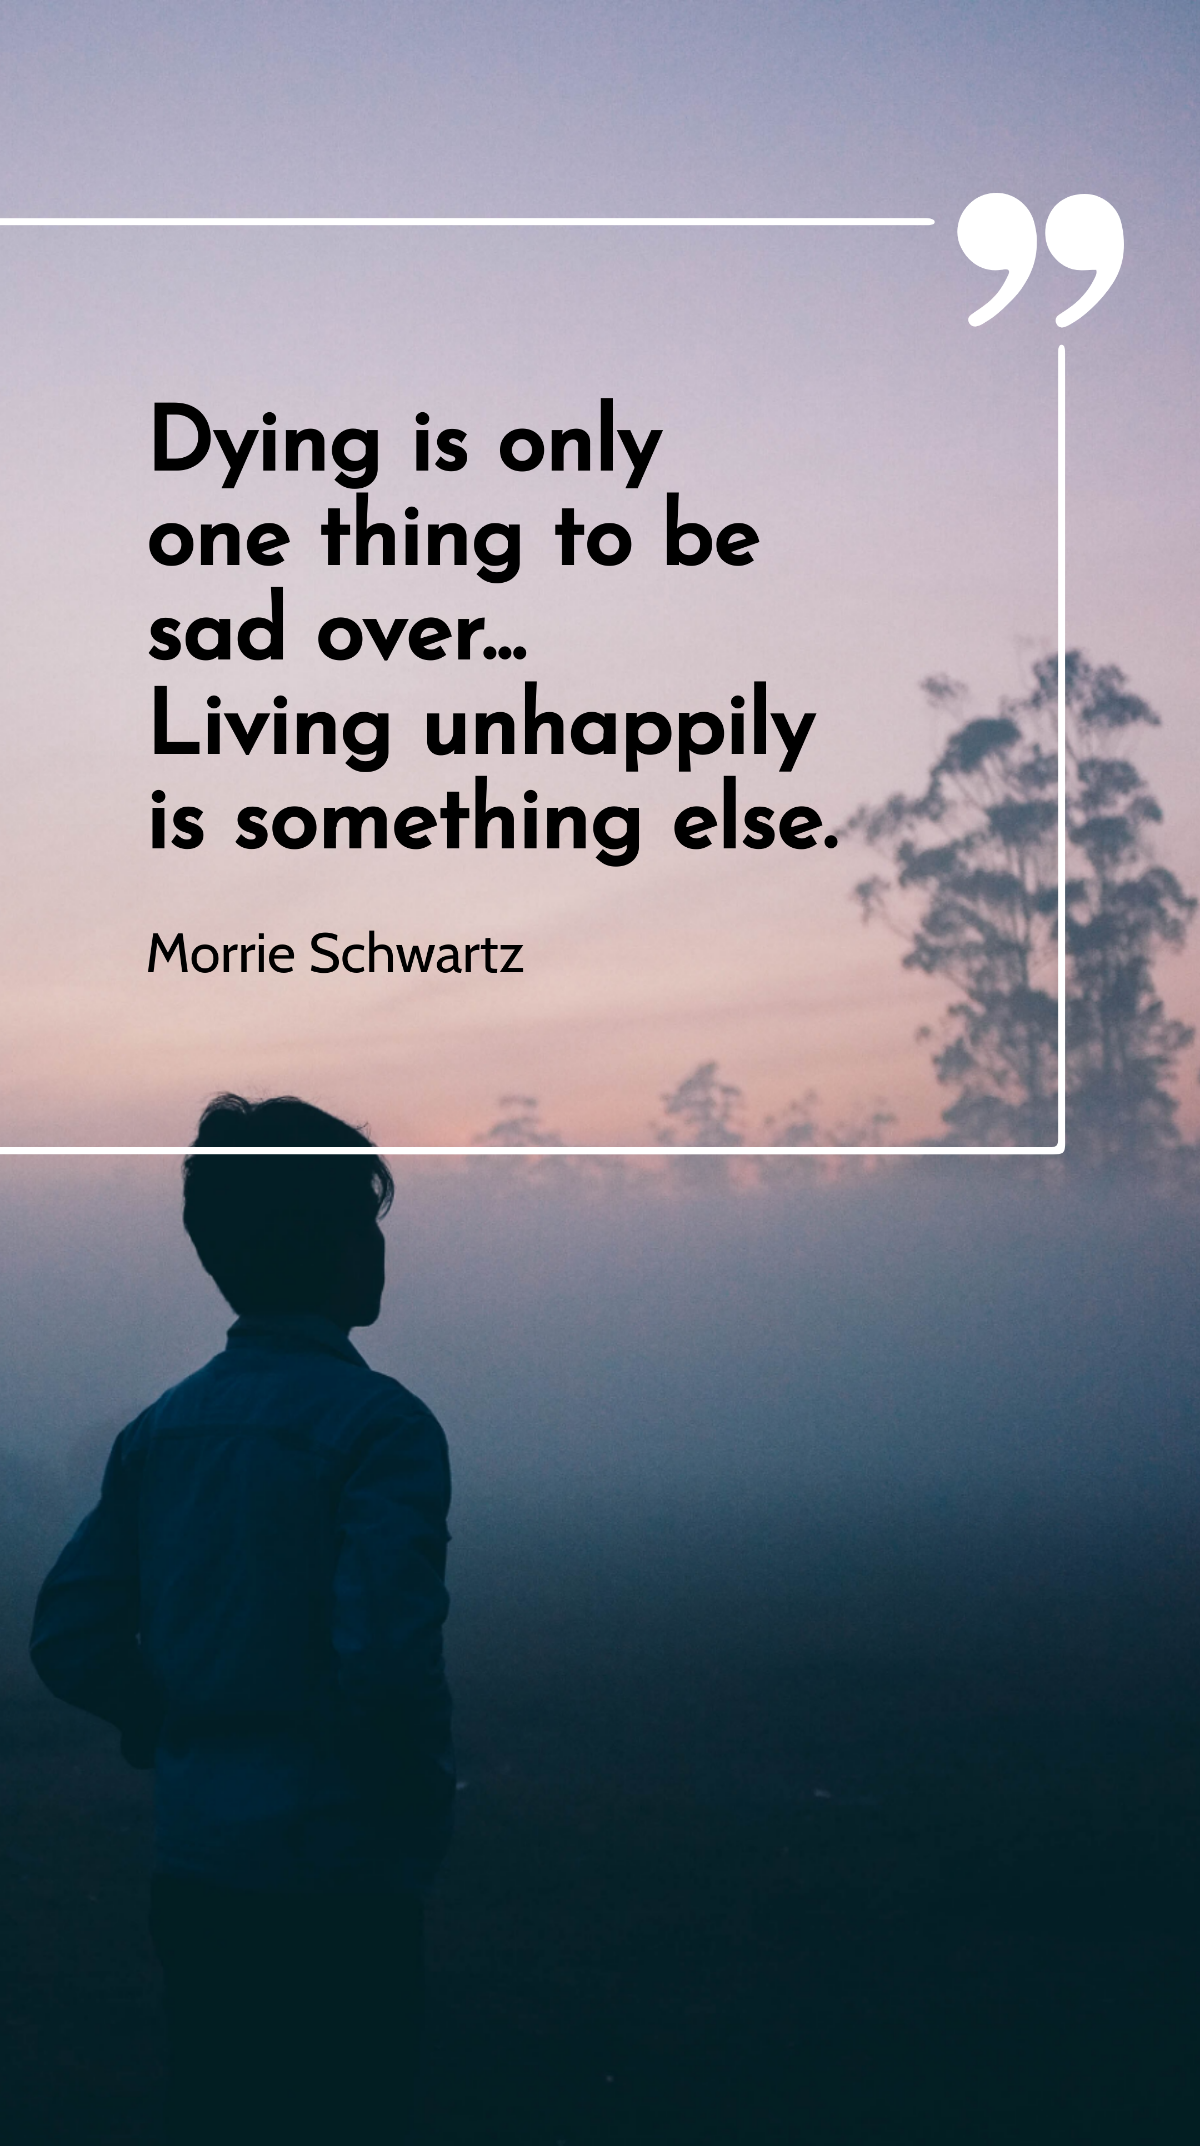 Morrie Schwartz - Dying is only one thing to be sad over... Living unhappily is something else. Template